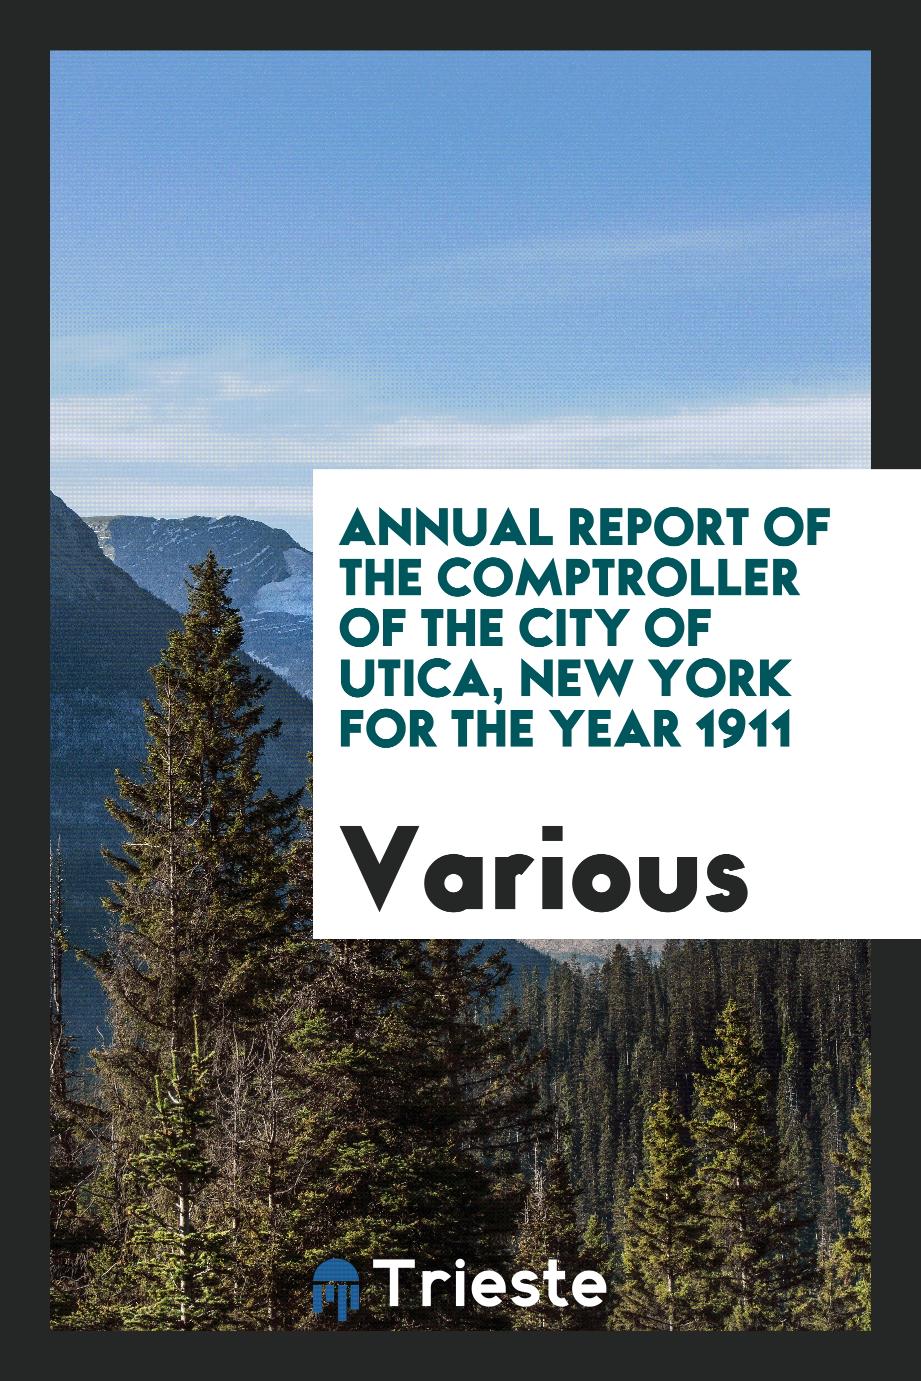 Annual Report of the Comptroller of the City of Utica, New York for the year 1911